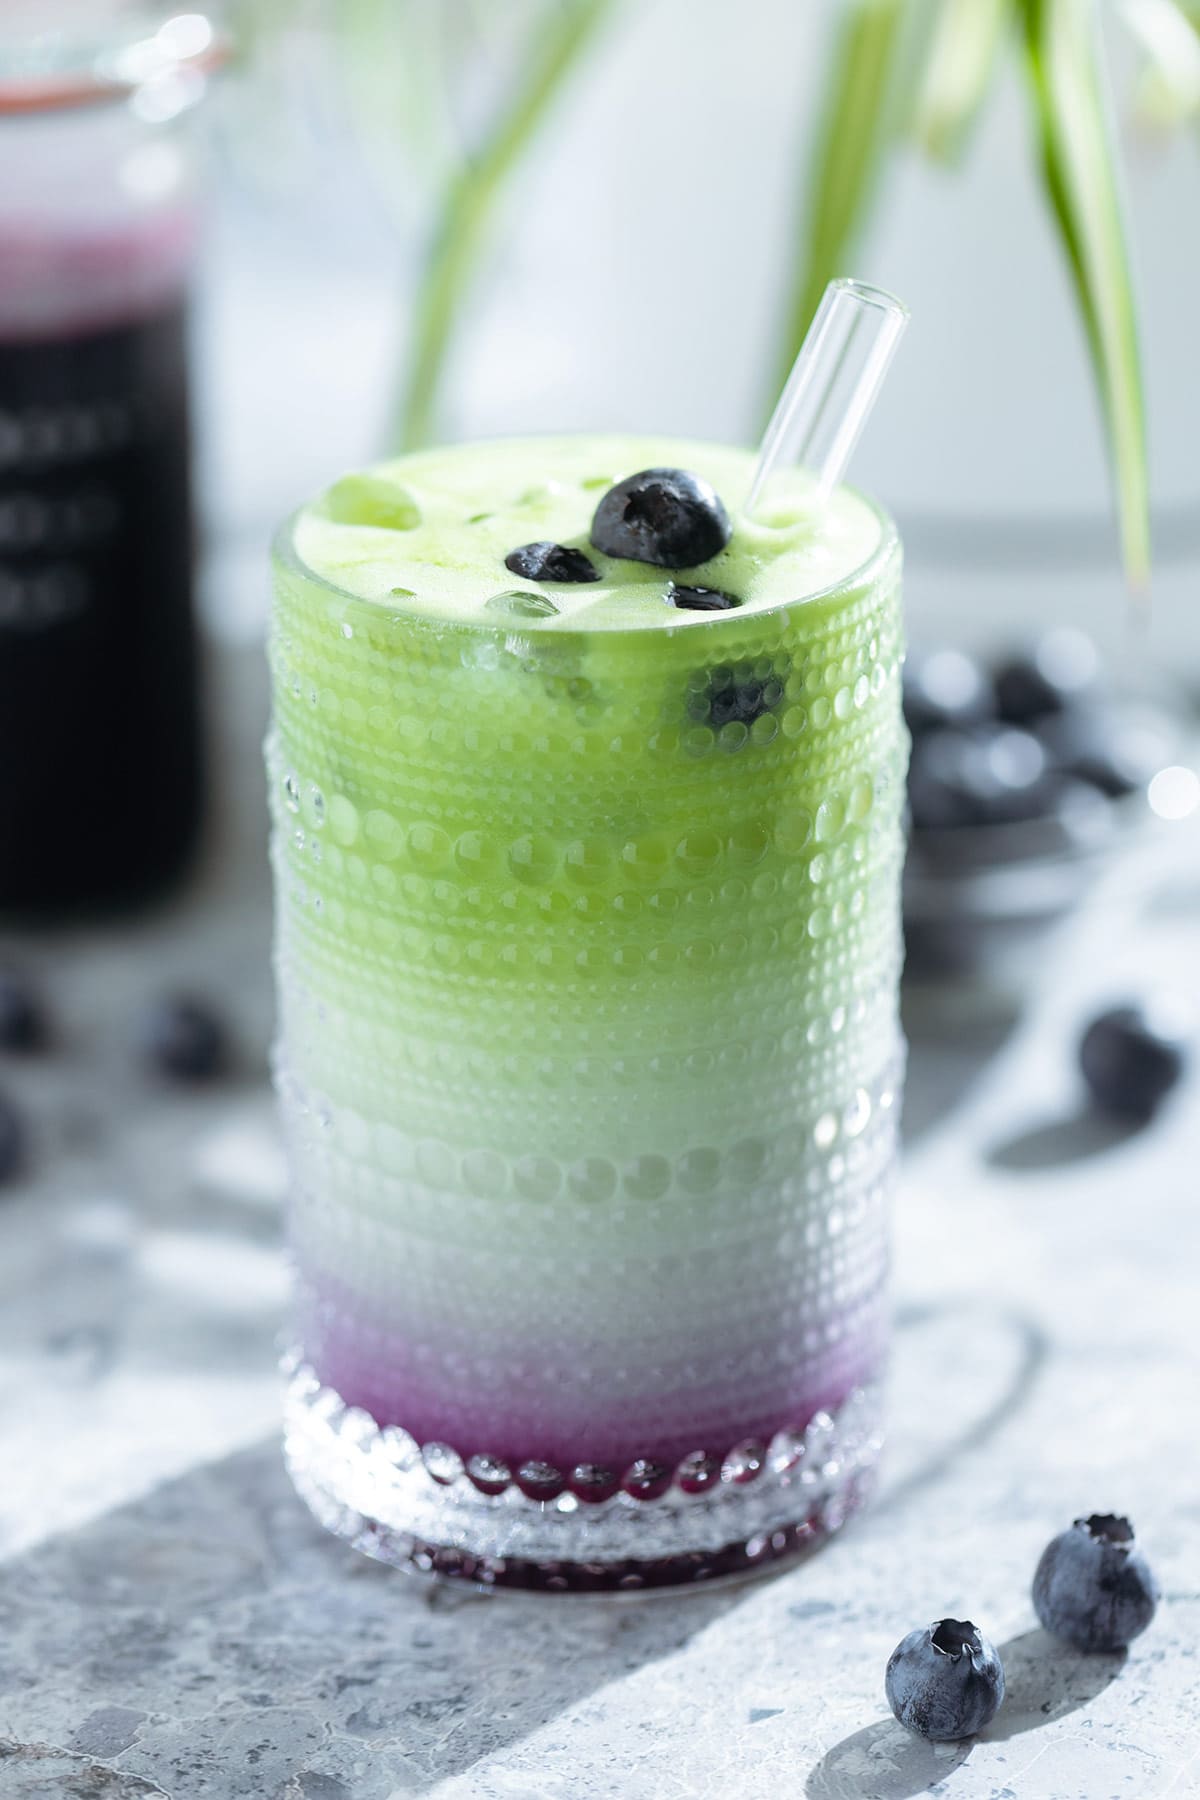 Iced matcha latte in a tall glass with a layer of blueberry syrup on the bottom of the glass garnished with fresh blueberries with a glass straw and a bottle of blueberry syrup in the background.